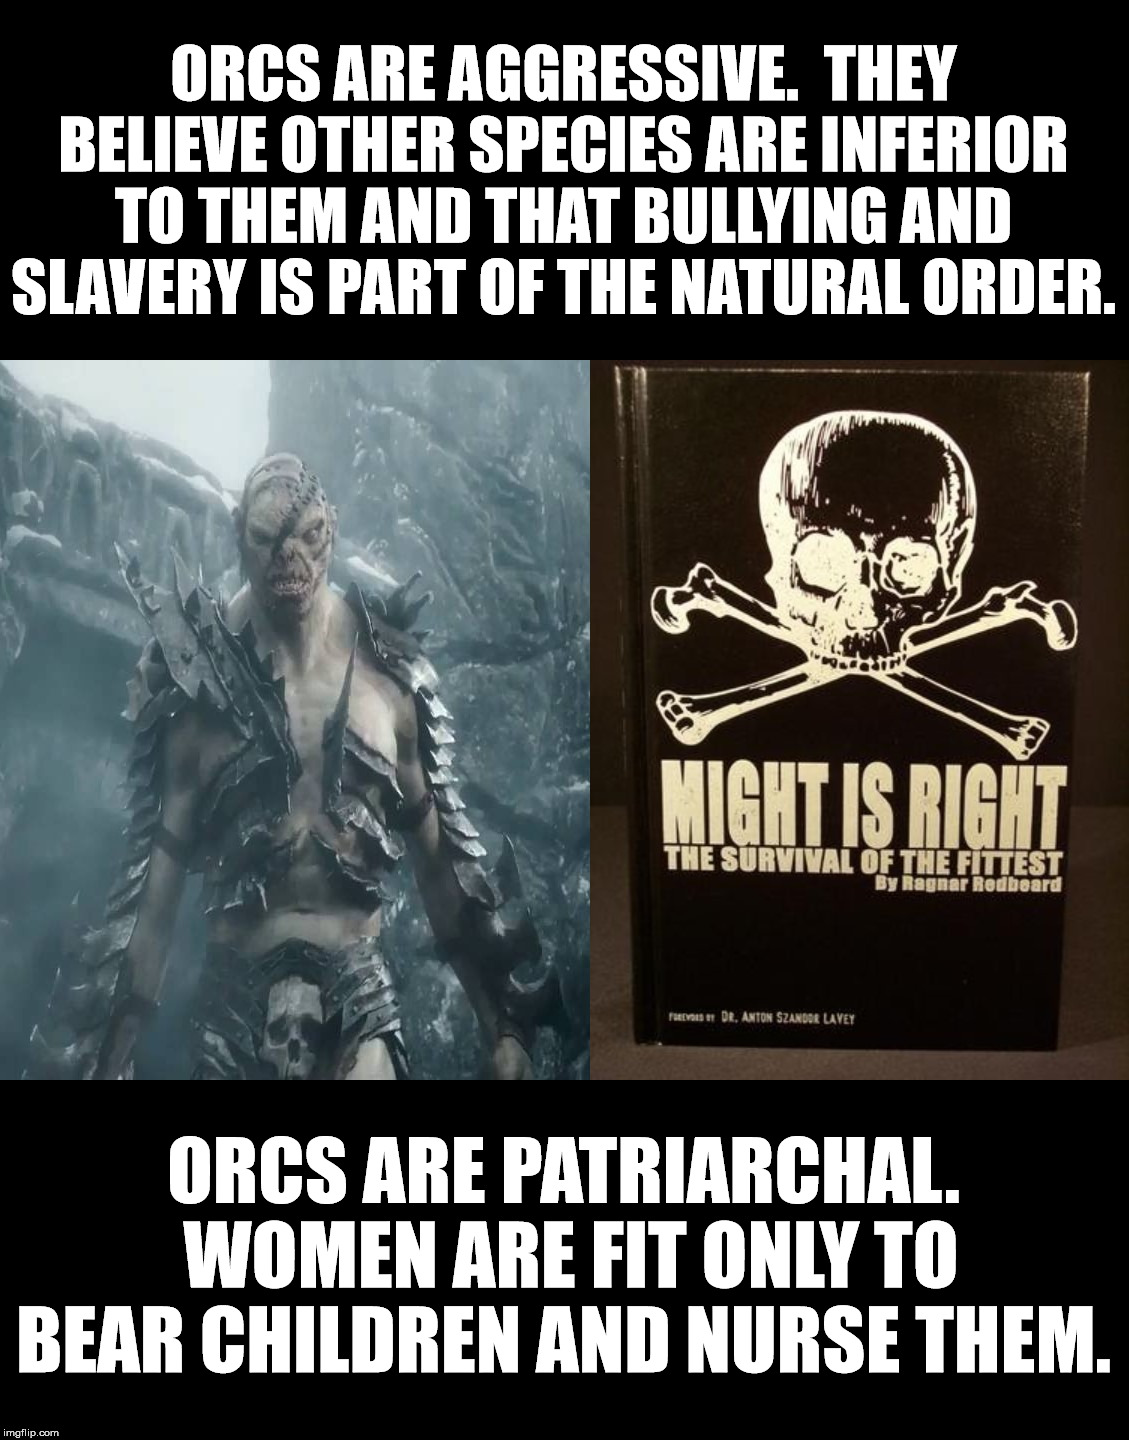 Orcs and Might is Right. | ORCS ARE AGGRESSIVE.  THEY BELIEVE OTHER SPECIES ARE INFERIOR TO THEM AND THAT BULLYING AND SLAVERY IS PART OF THE NATURAL ORDER. ORCS ARE PATRIARCHAL.  WOMEN ARE FIT ONLY TO BEAR CHILDREN AND NURSE THEM. | image tagged in orcs,might is right,malignant narcissism,bullying,slavery,evil | made w/ Imgflip meme maker